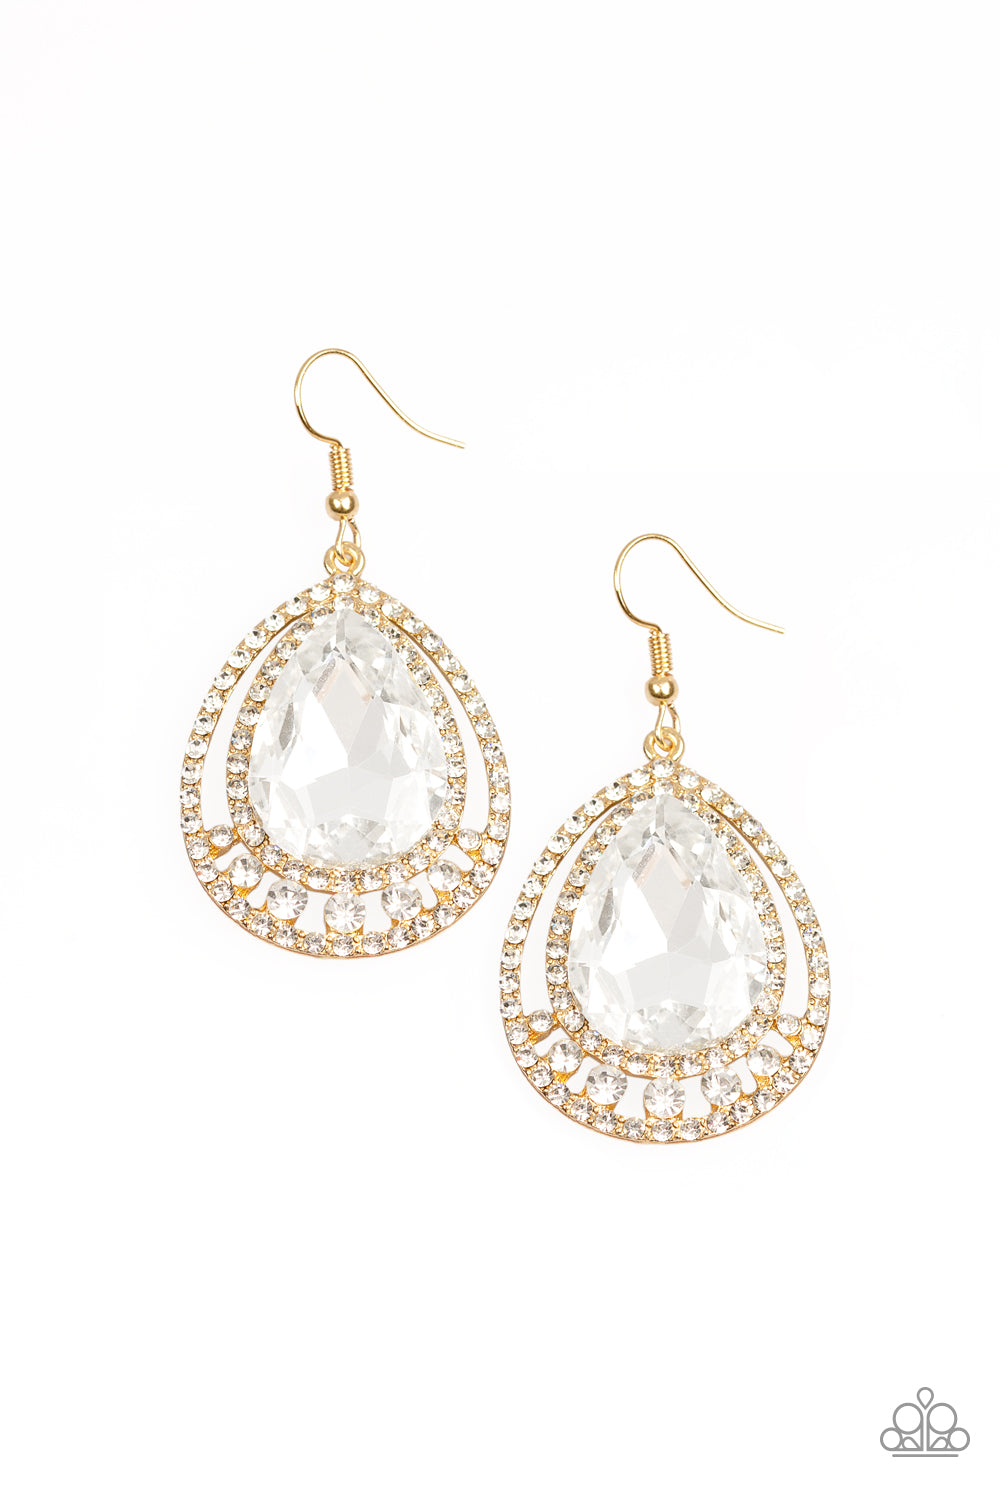 All Rise For Her Majesty - Gold earrings